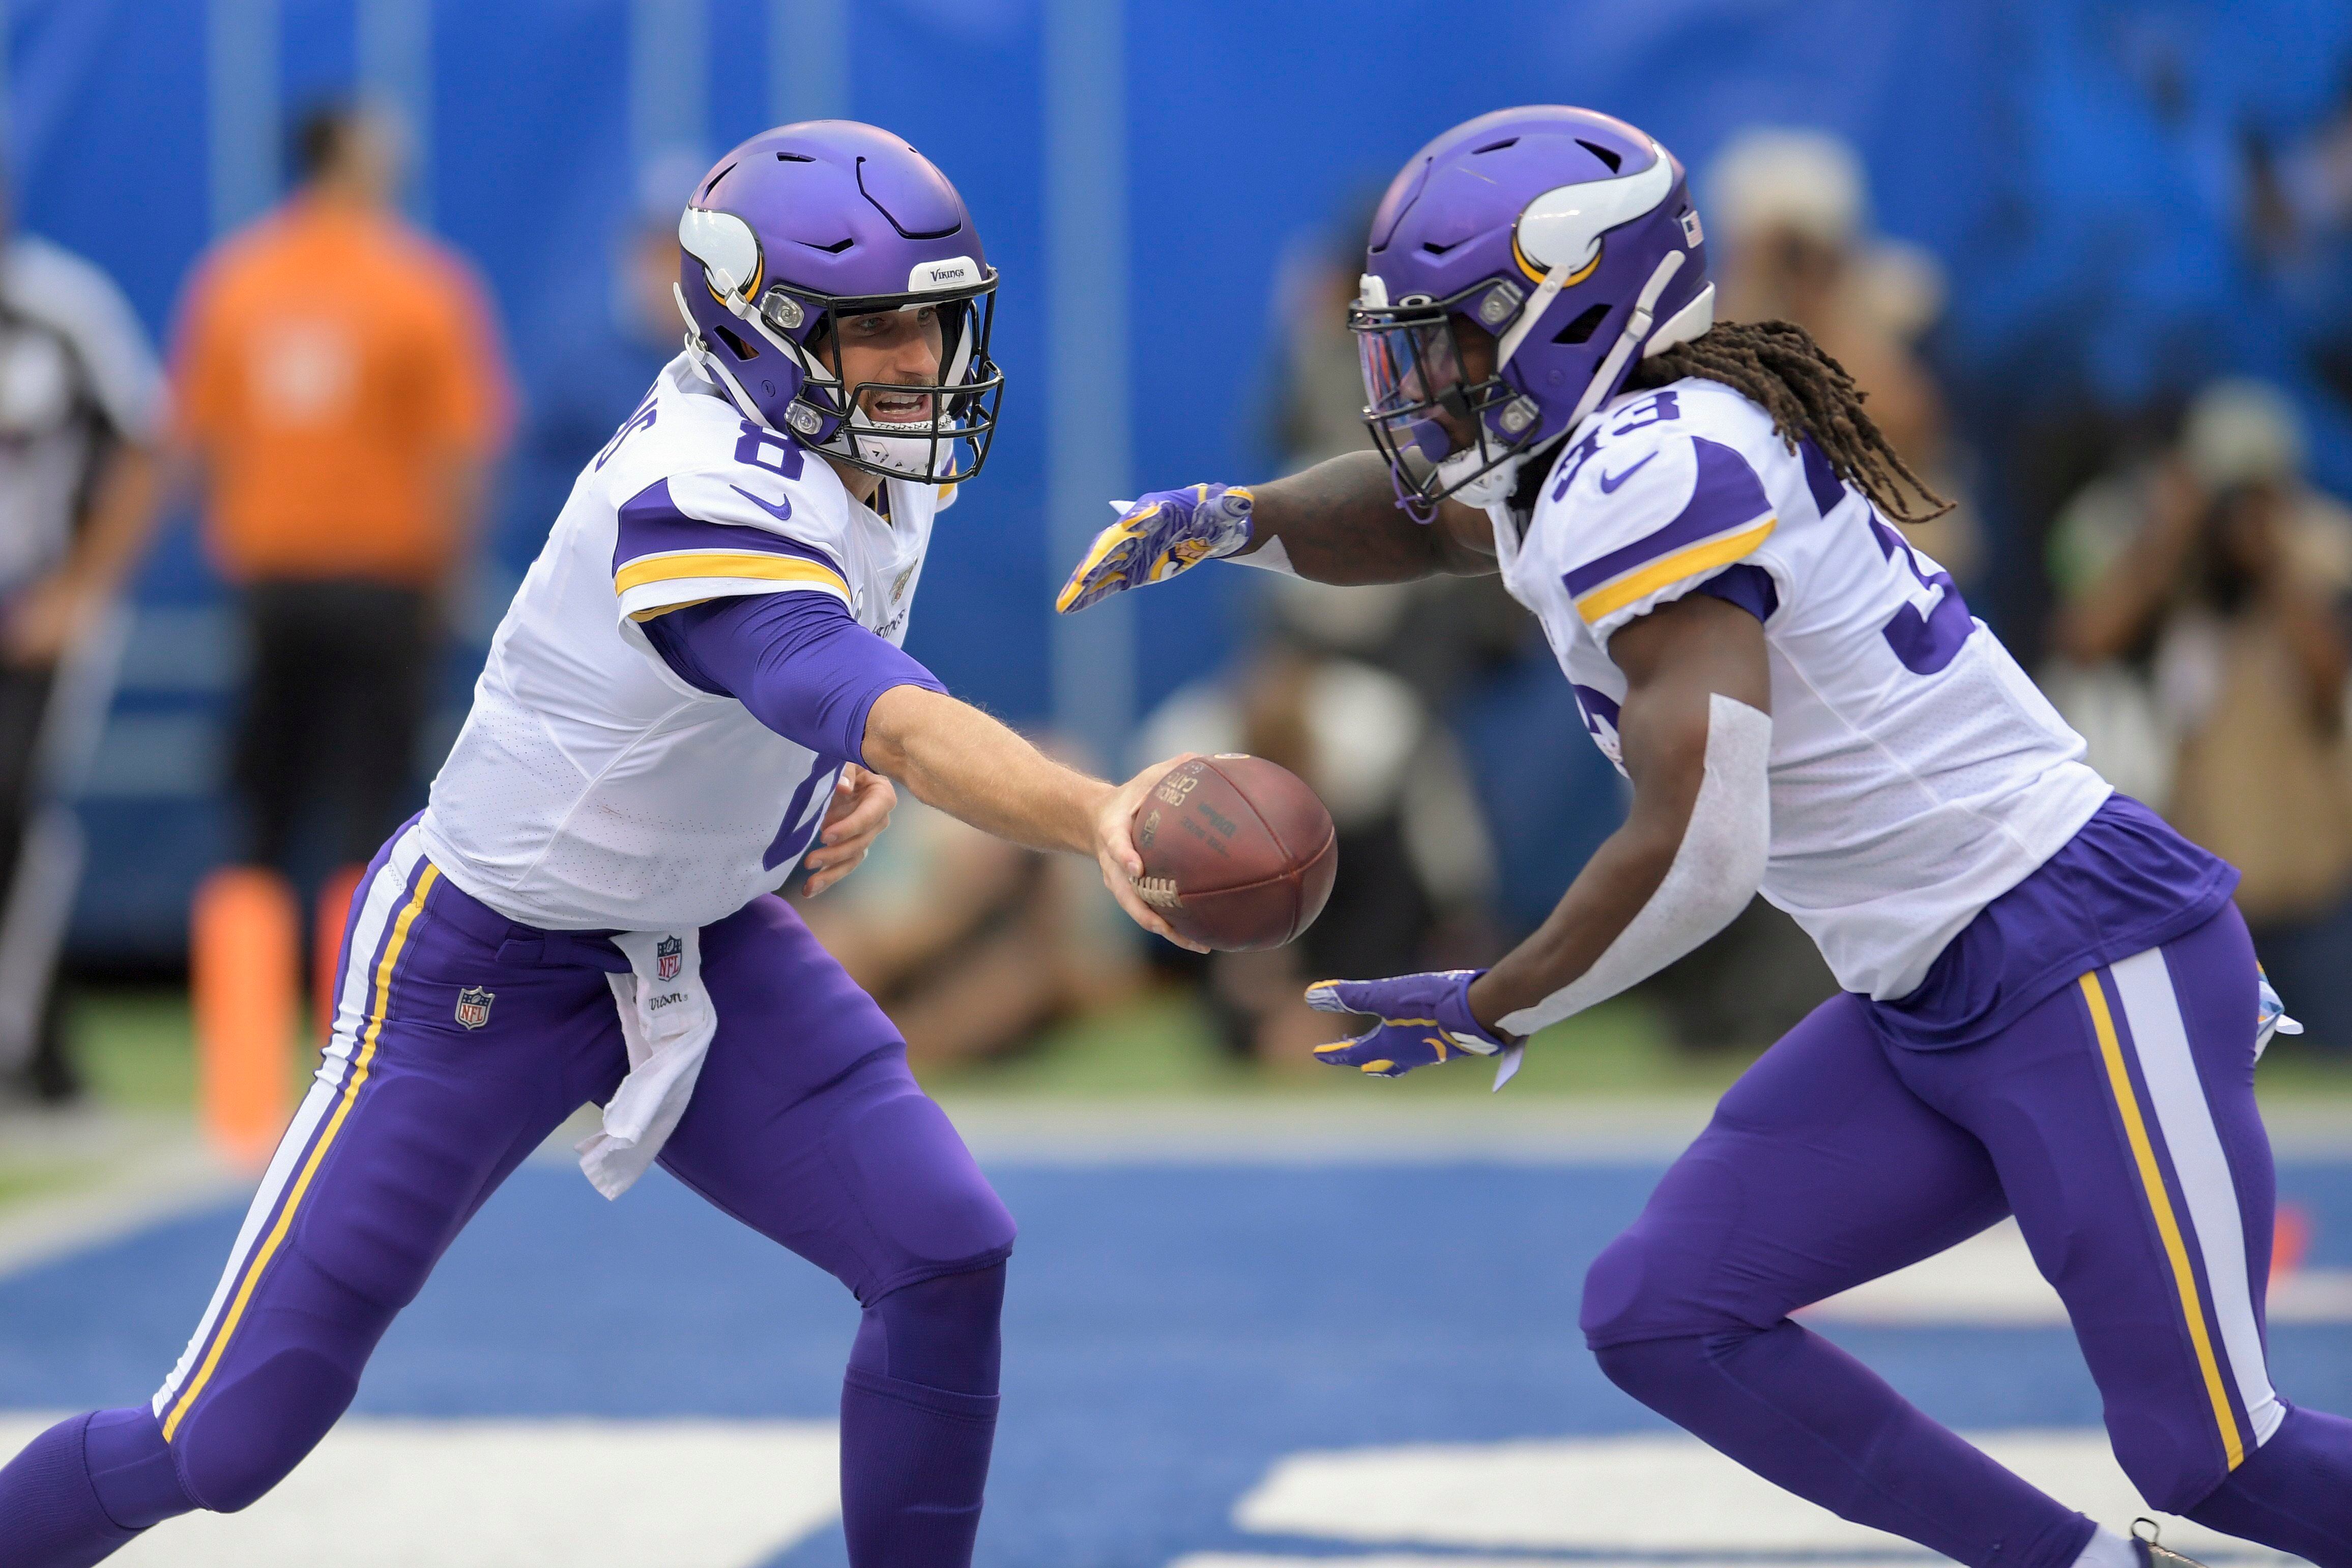 ESPN thinks the Vikings are going to look a whole lot different in